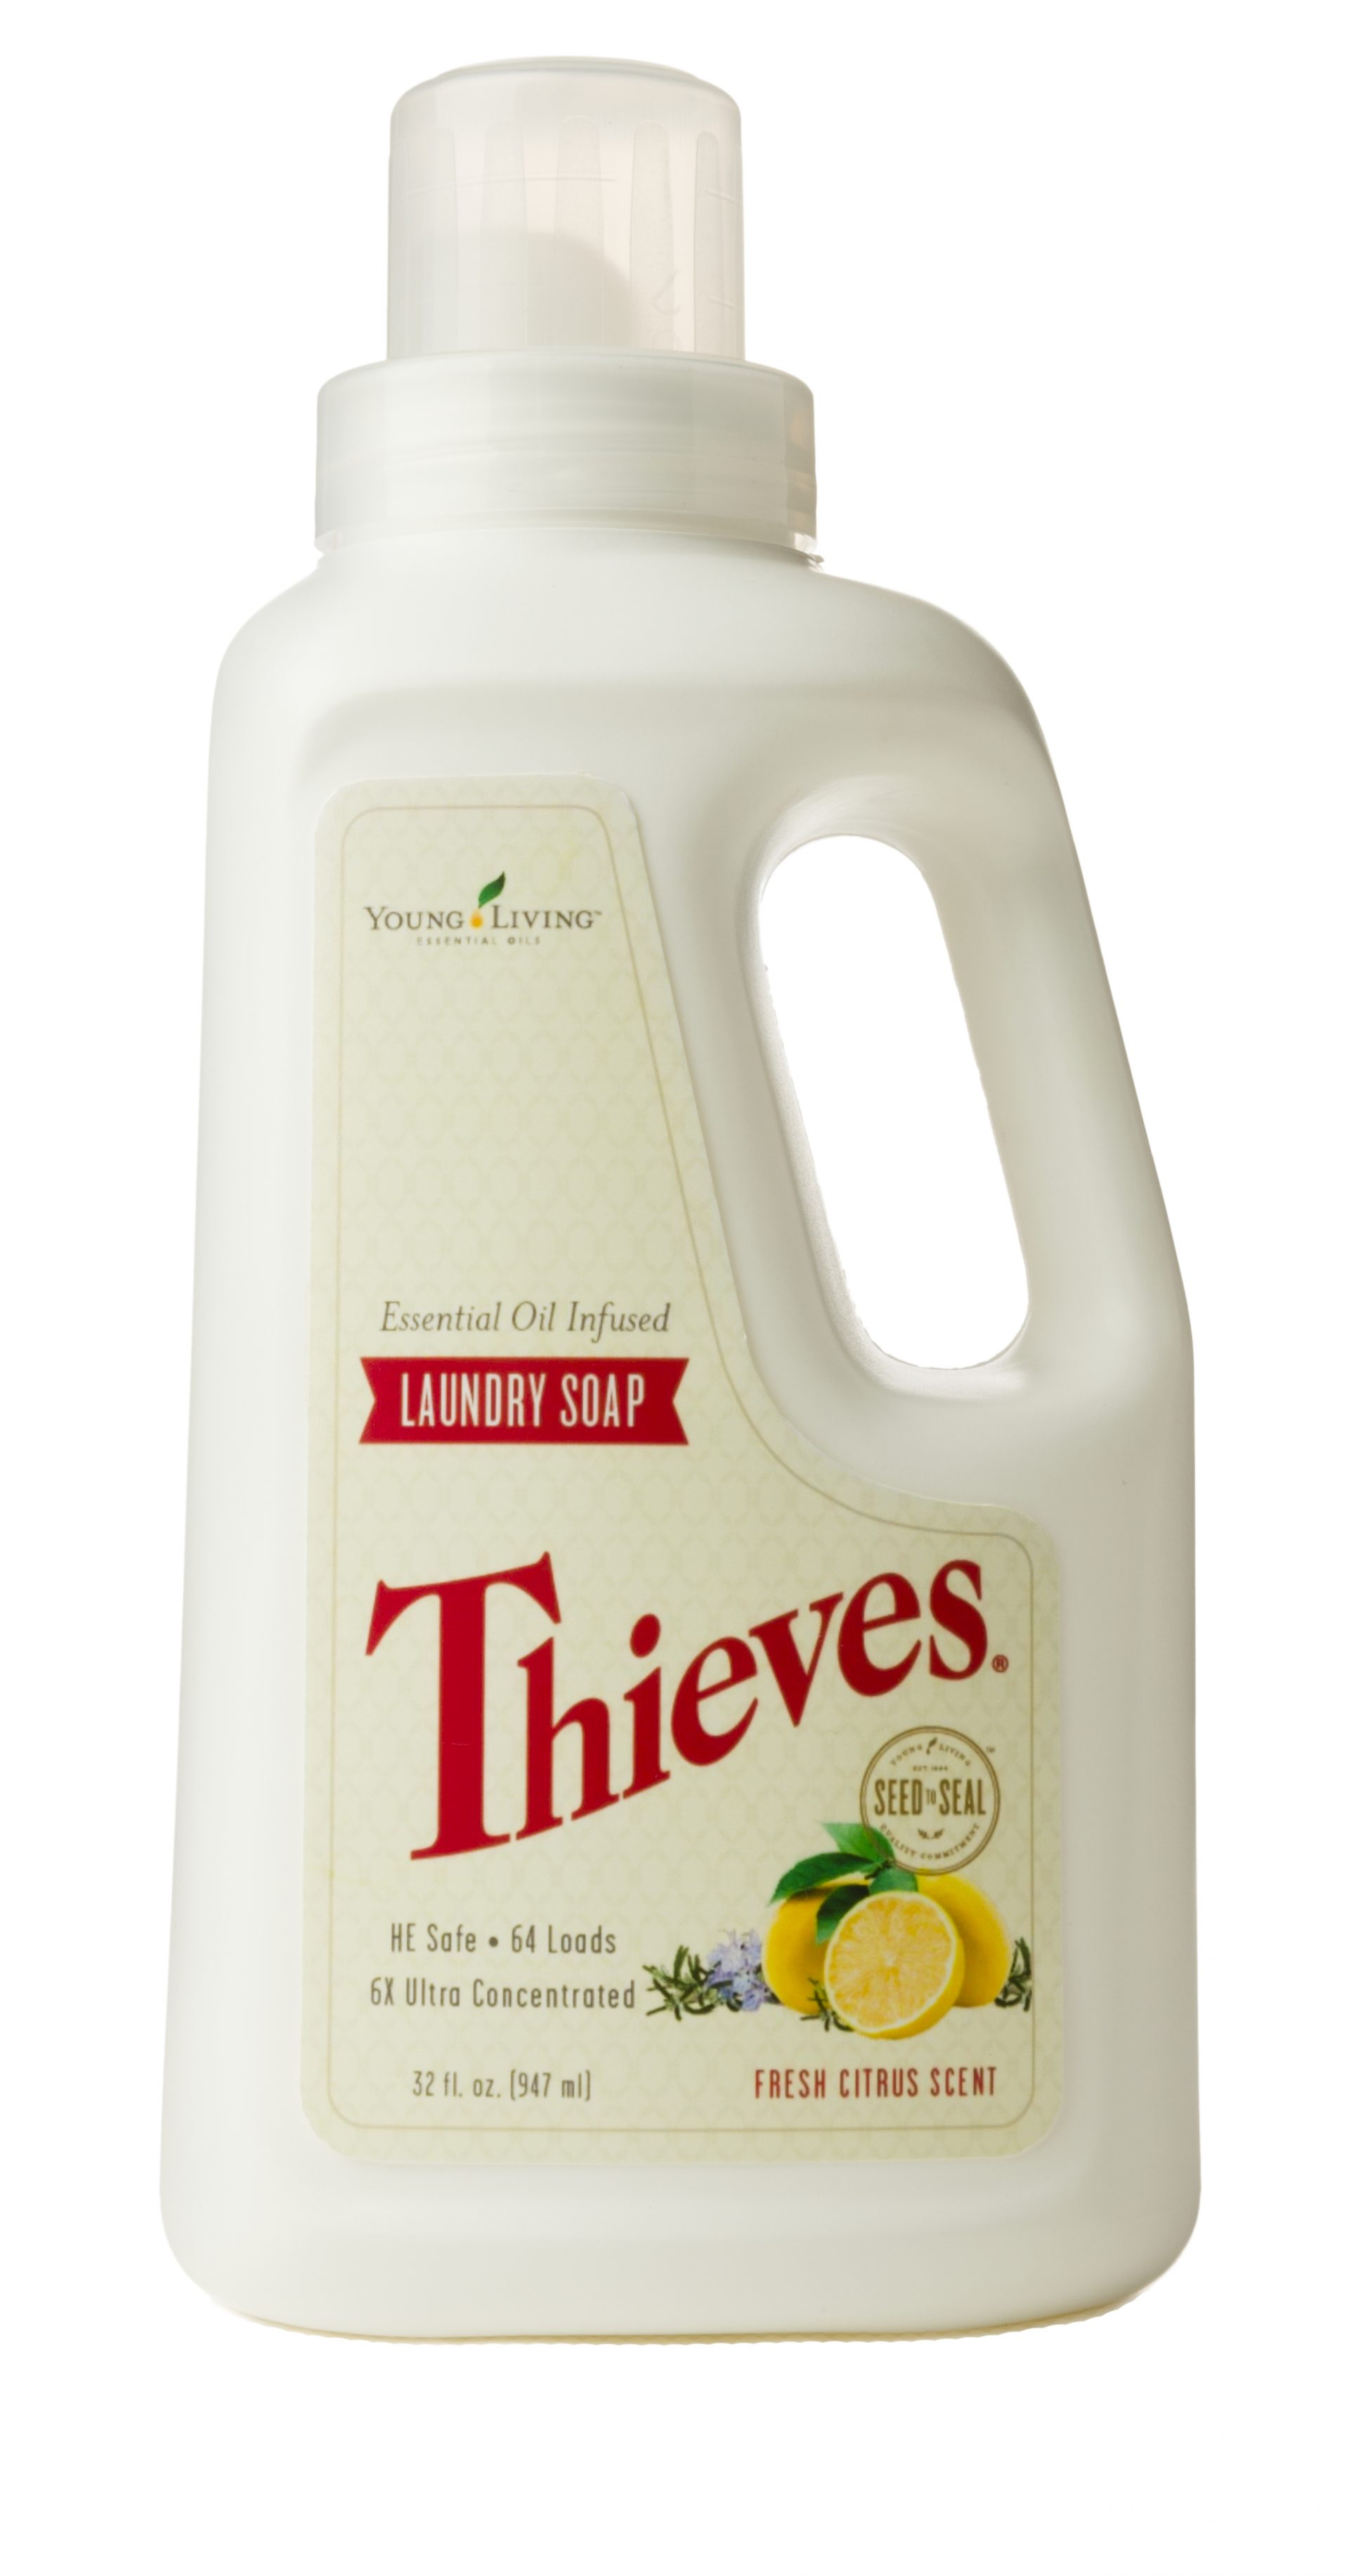 https://www.youngliving.com/en_US/products/thieves-laundry-soap